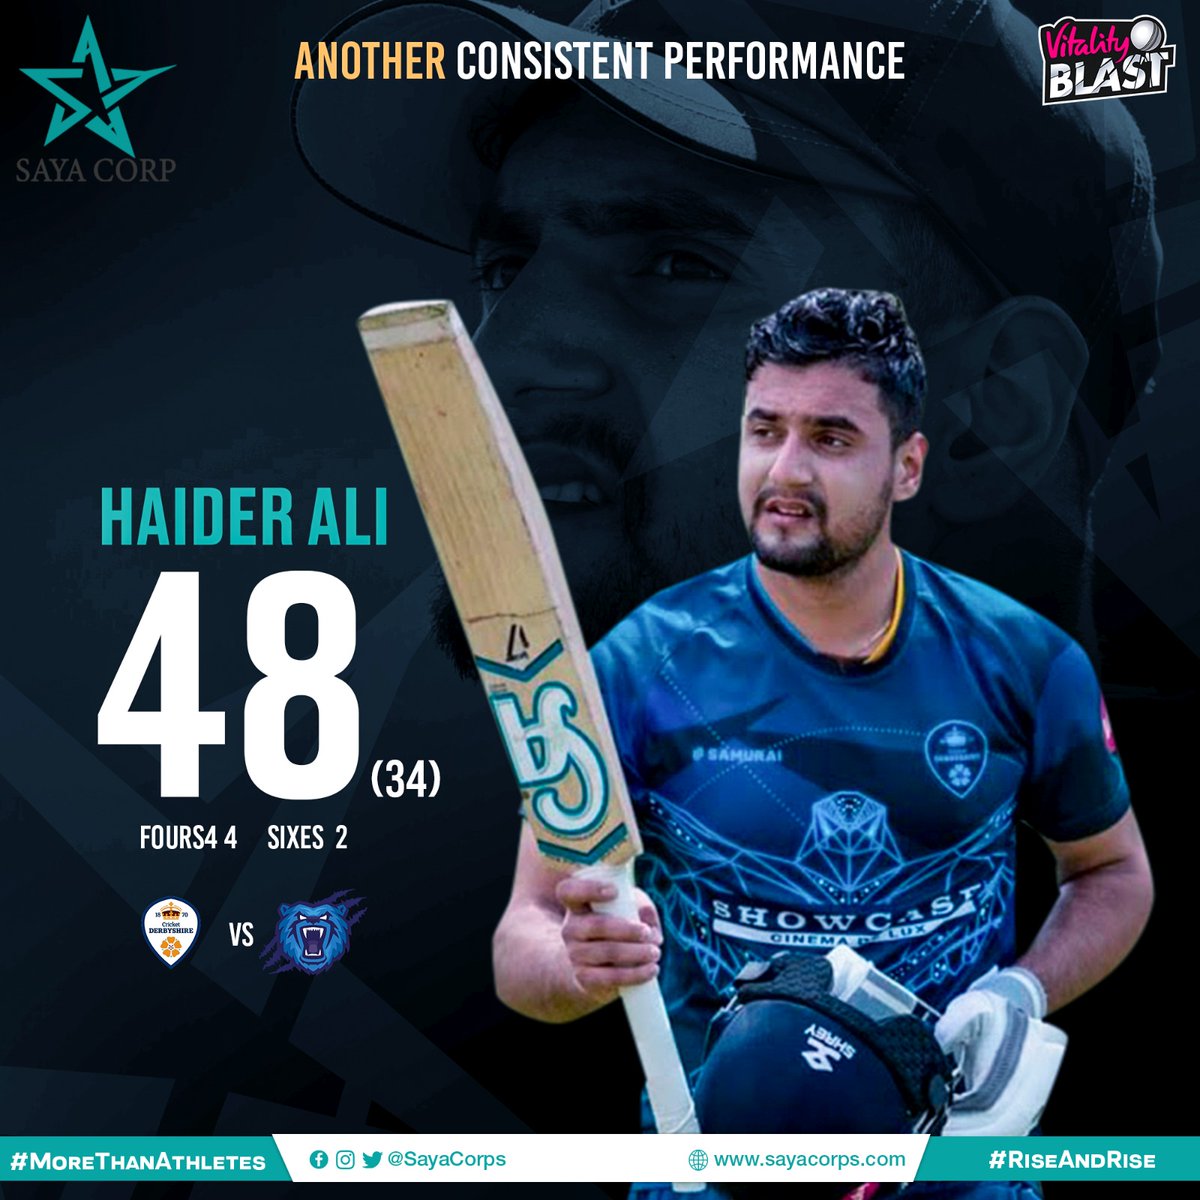 4️⃣8️⃣ off  3️⃣4️⃣ ball including 4️⃣ fours and 2️⃣ big sixes 💥

The #SayaCorporation @iamhaideraly was once again shining bright for Derbyshire against Warwickshire.

The rocketing start helped his team chase 200+ with 3️⃣ balls to spare.

#MoreThanAthletes #RiseAndRise @TalhaAisham